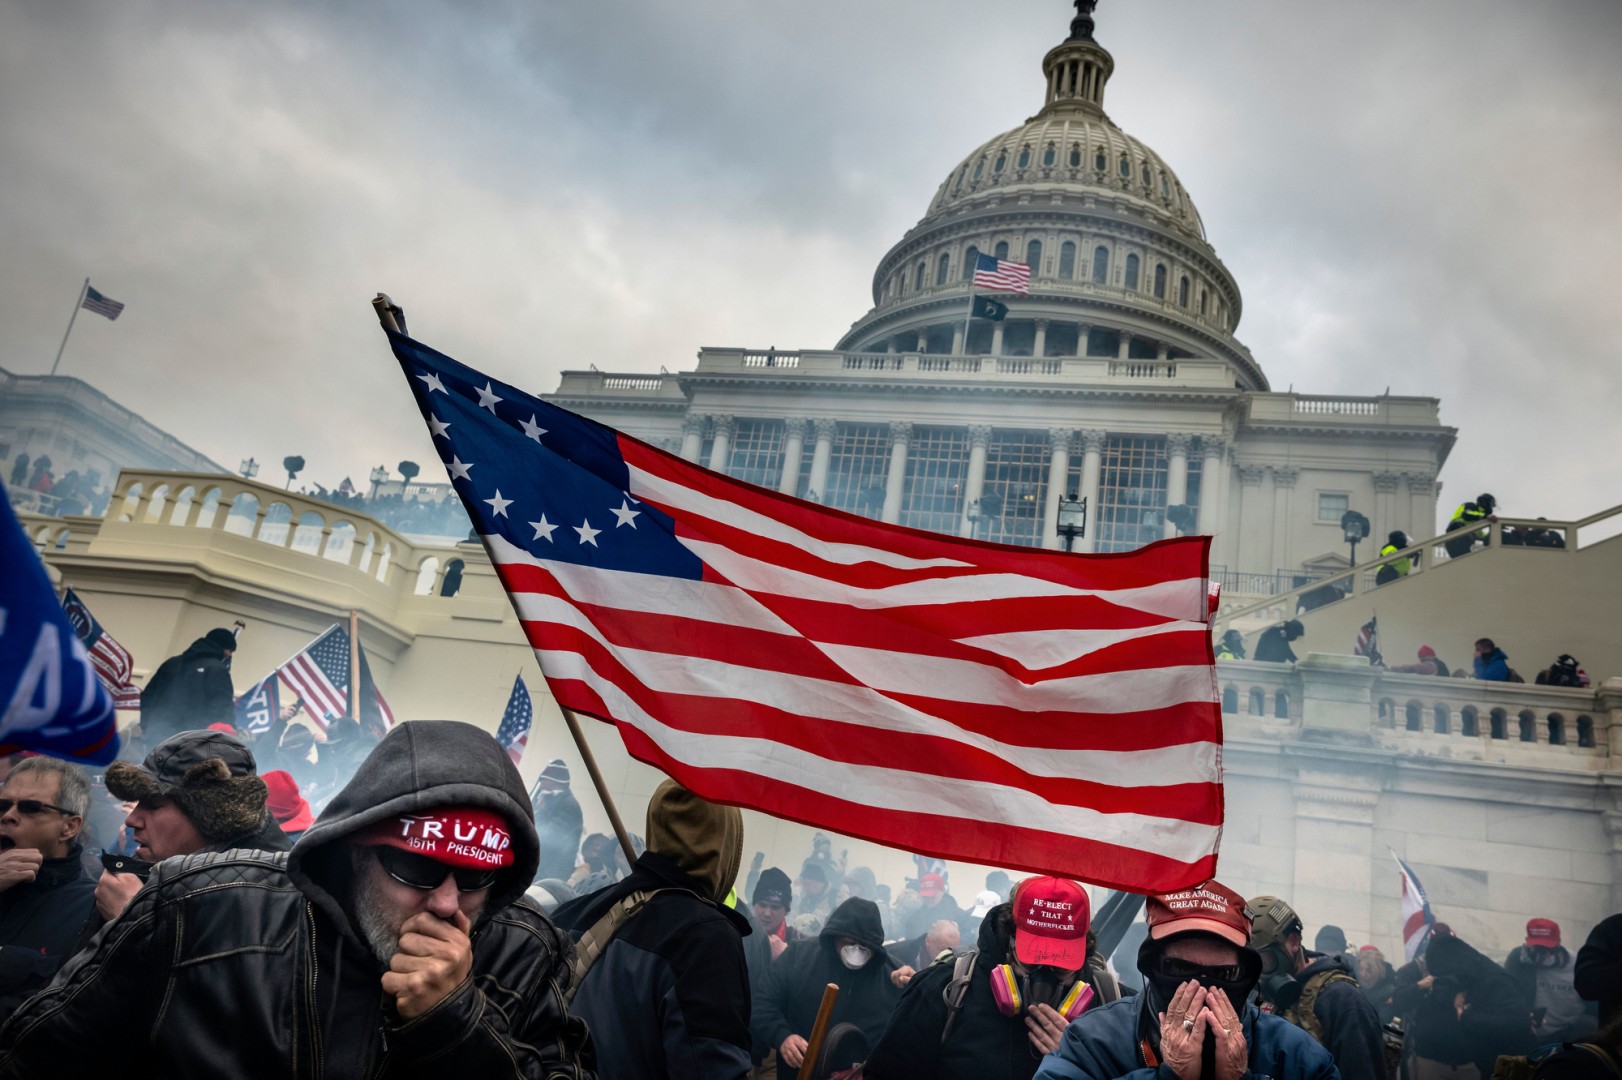 Photo of those involved in the January 2021 insurrection, with the Capitol building in the background.